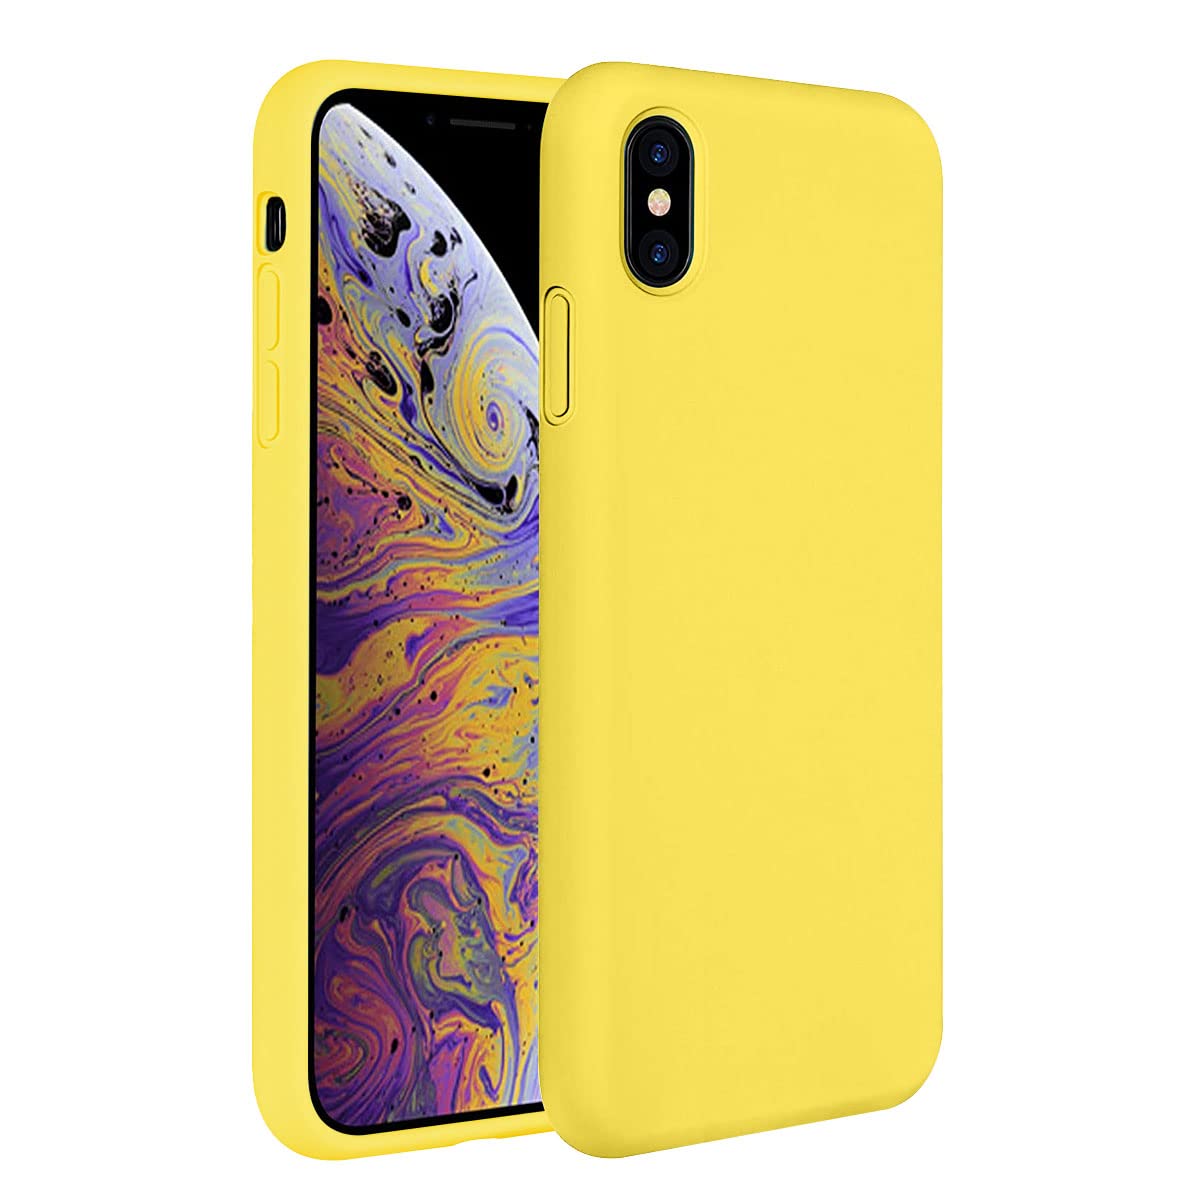 iPhone X / XS Silicone Case with Wireless Charging Support